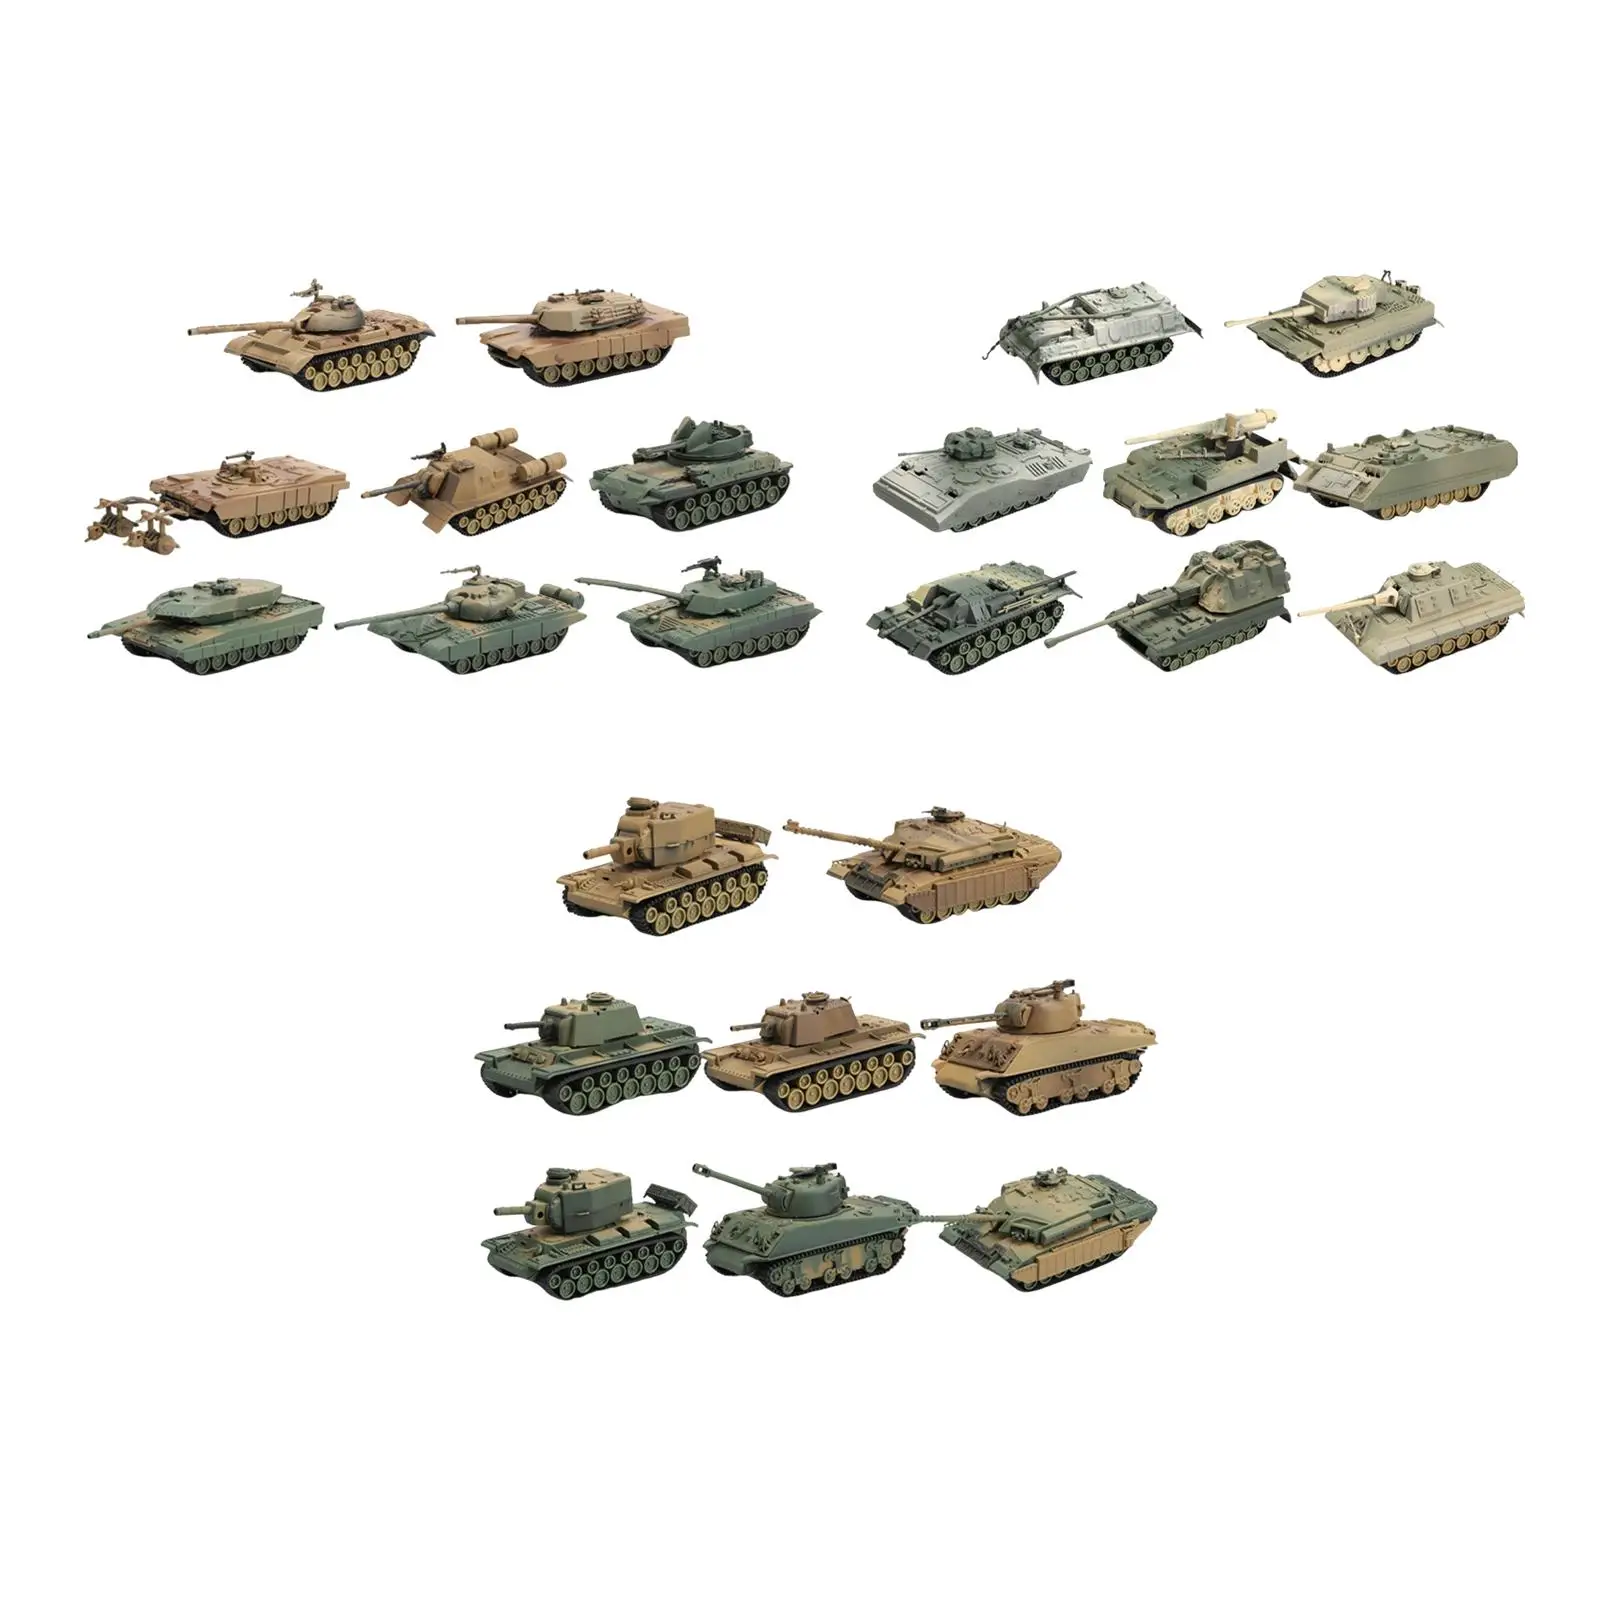 8 Pieces 1/72 Static Tanks Decorative Gifts Collectibles Building Kits Toys Party Favors for Boys Girls Teenagers Beginners